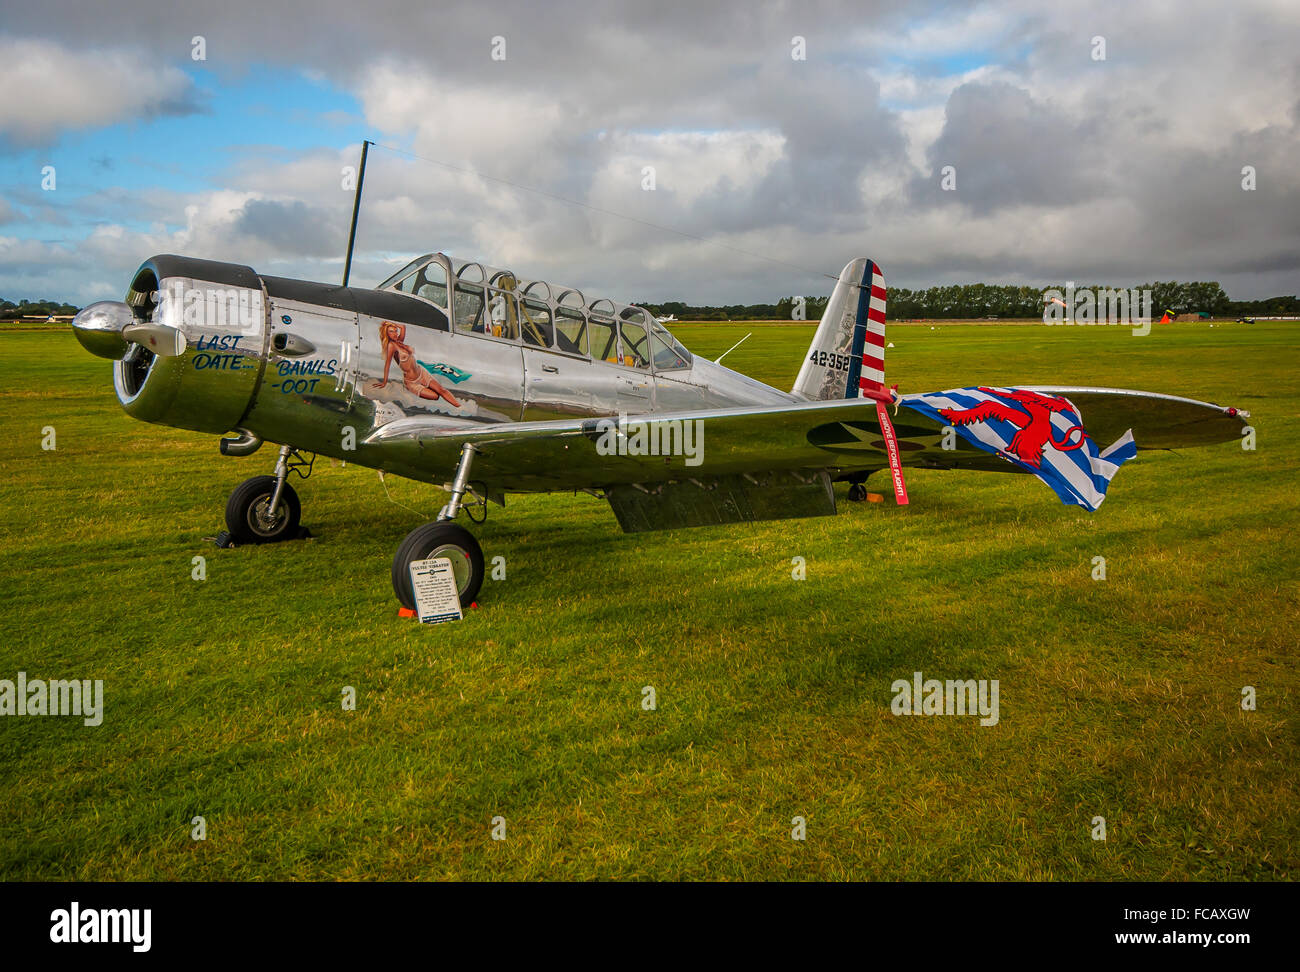 Vultee BT-13 Valiant was an American World War II-era basic trainer  aircraft built by Vultee Aircraft for the US Army Air Force. Space for copy  Stock Photo - Alamy